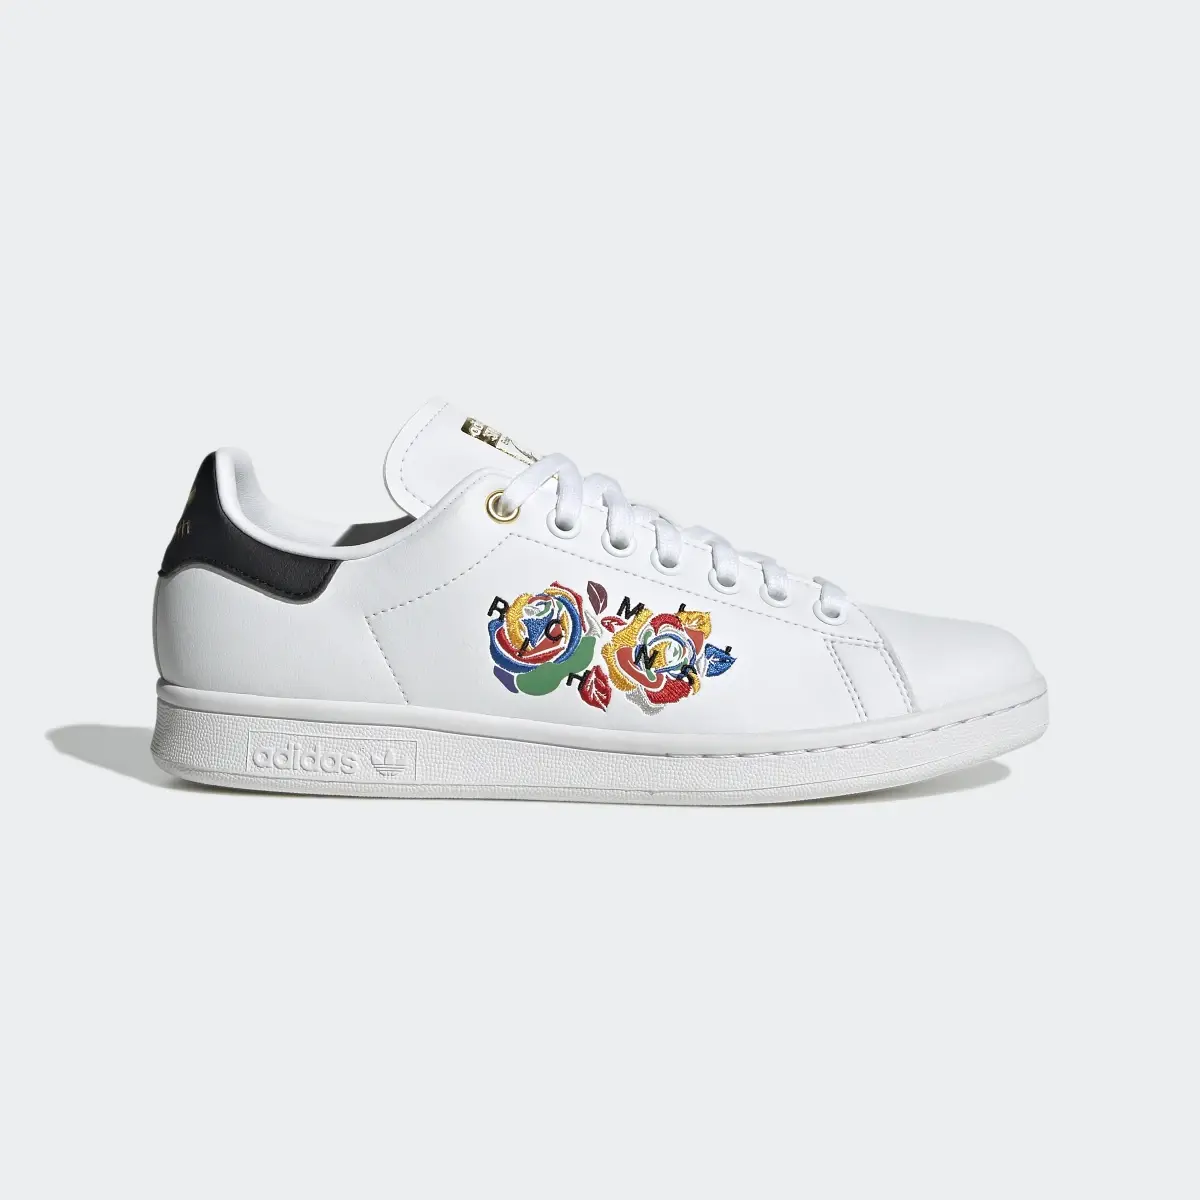 Adidas Rich Mnisi Stan Smith Shoes. 2